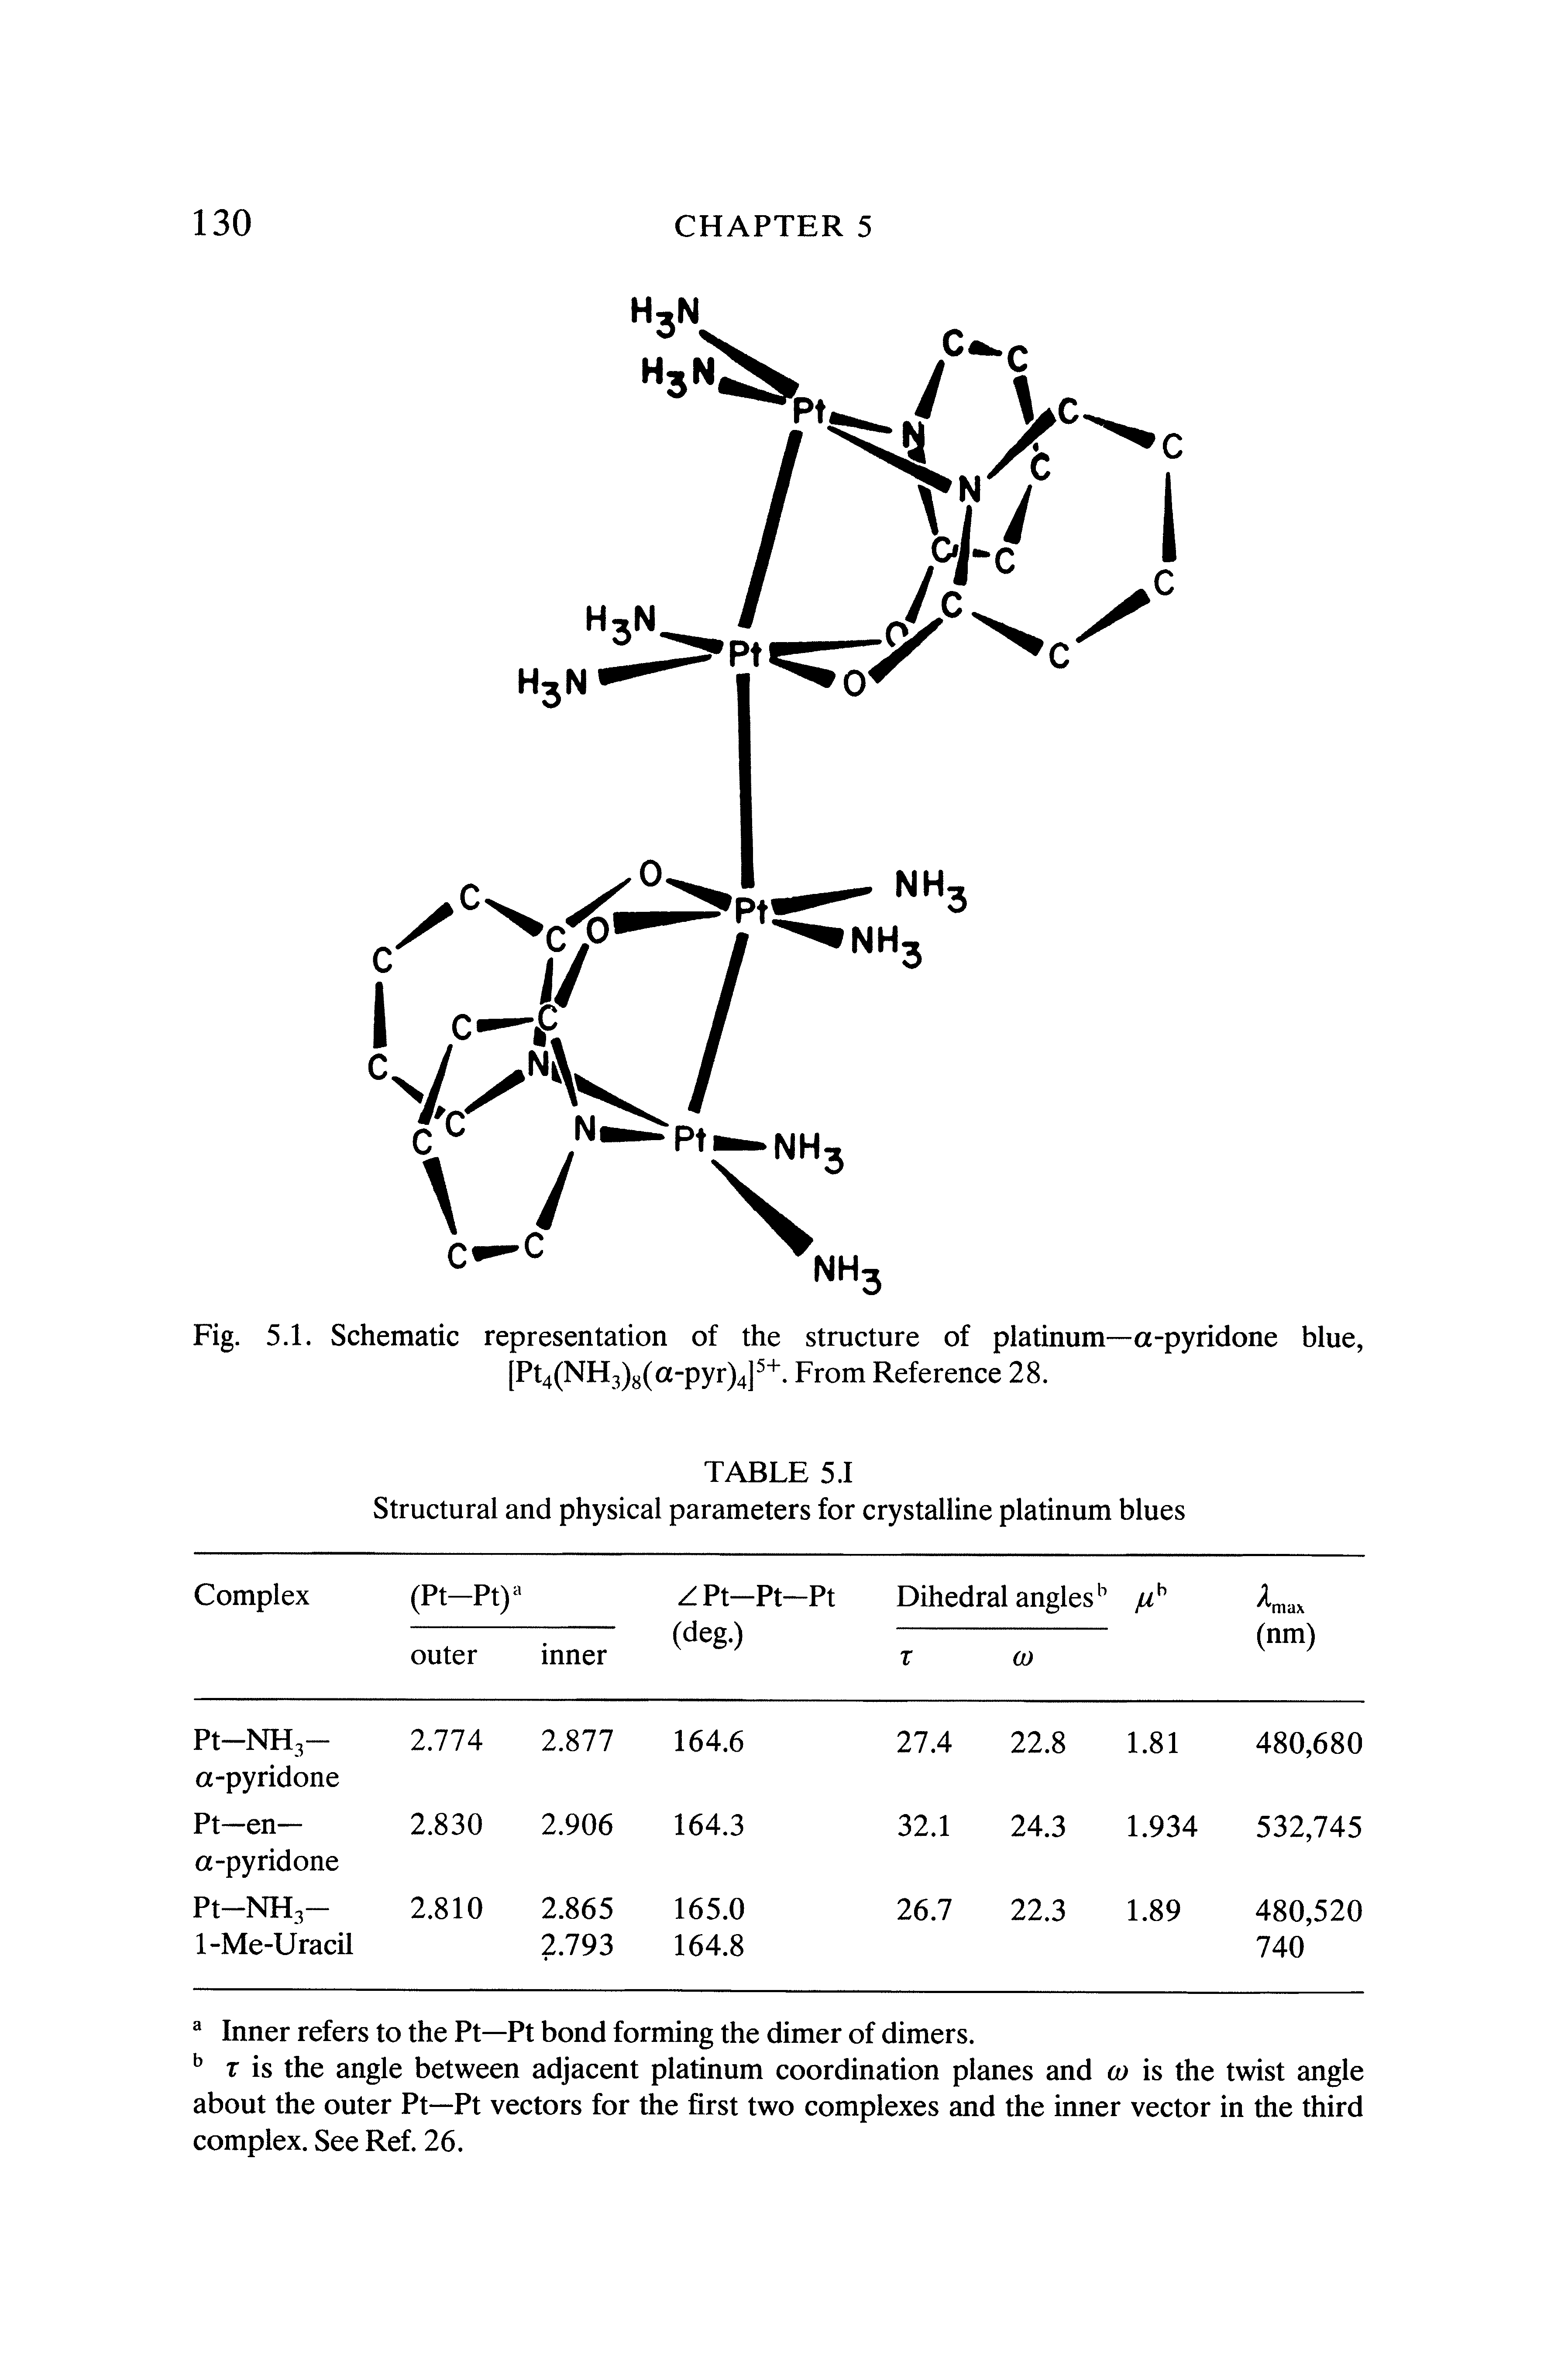 Fig. 5.1. Schematic representation of the structure of platinum—a-pyridone blue, [Pt4(NH3)g(a-pyr)4]. From Reference 28.